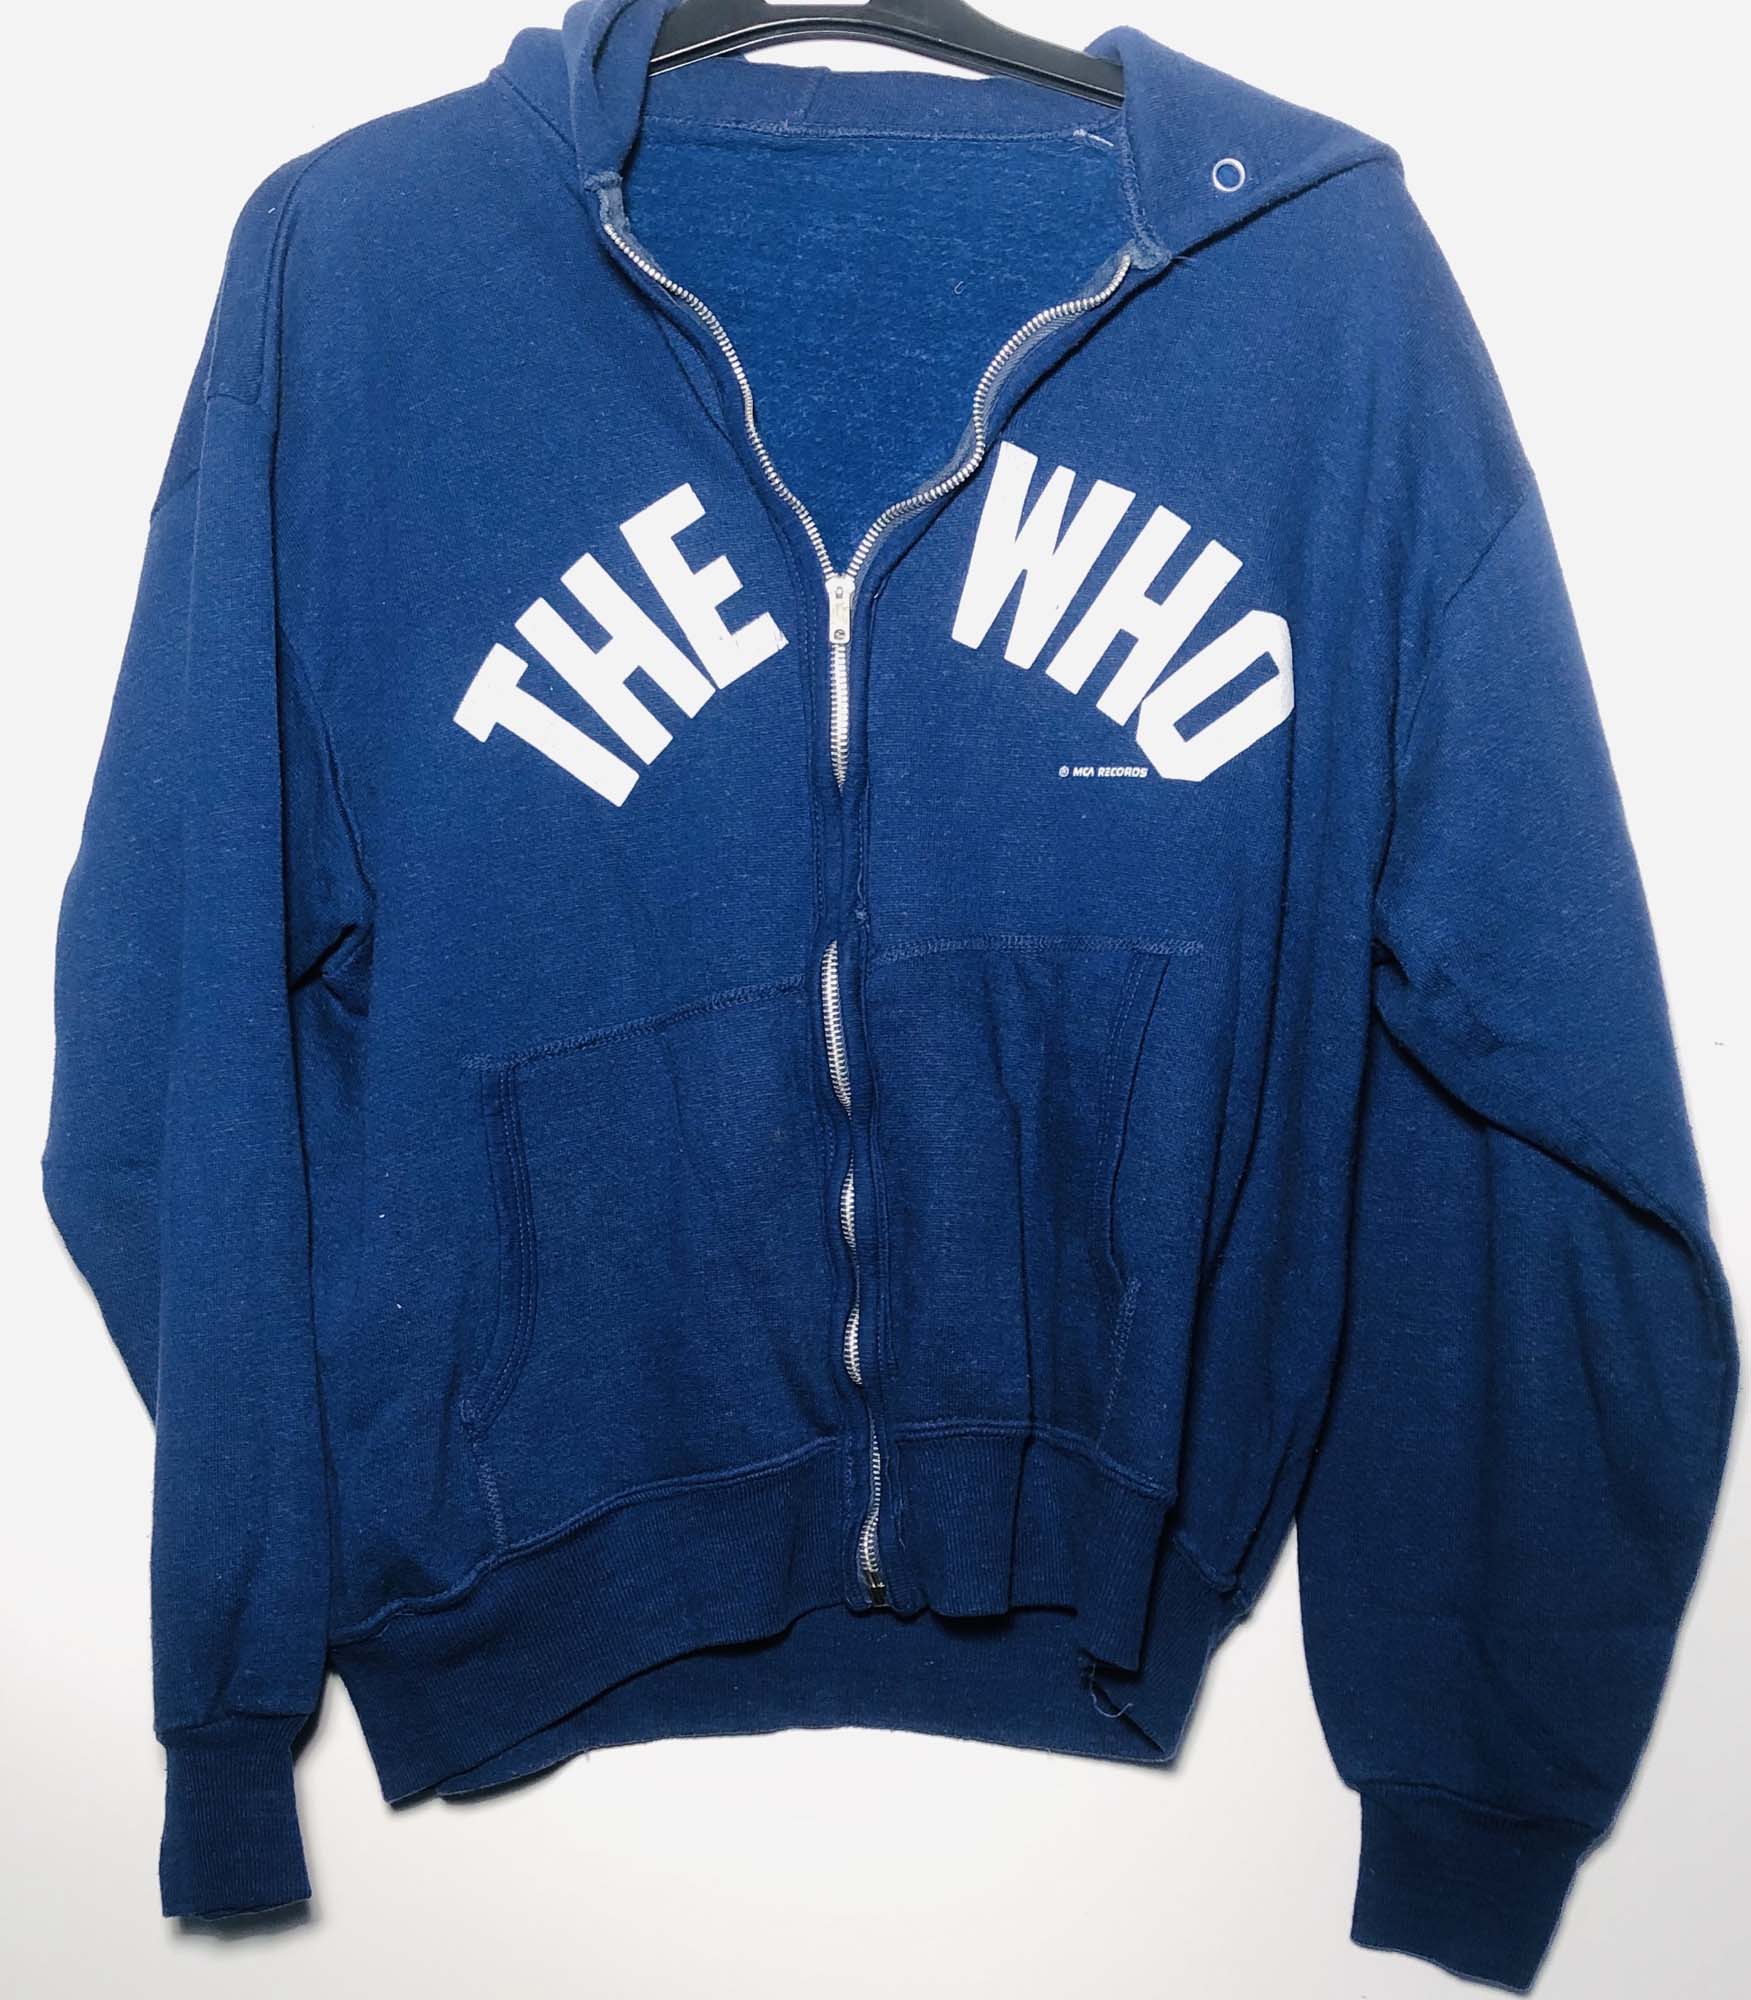 THE WHO. An officially issued hooded top with printed 'The Who' logo and 'MCA Records' to front.